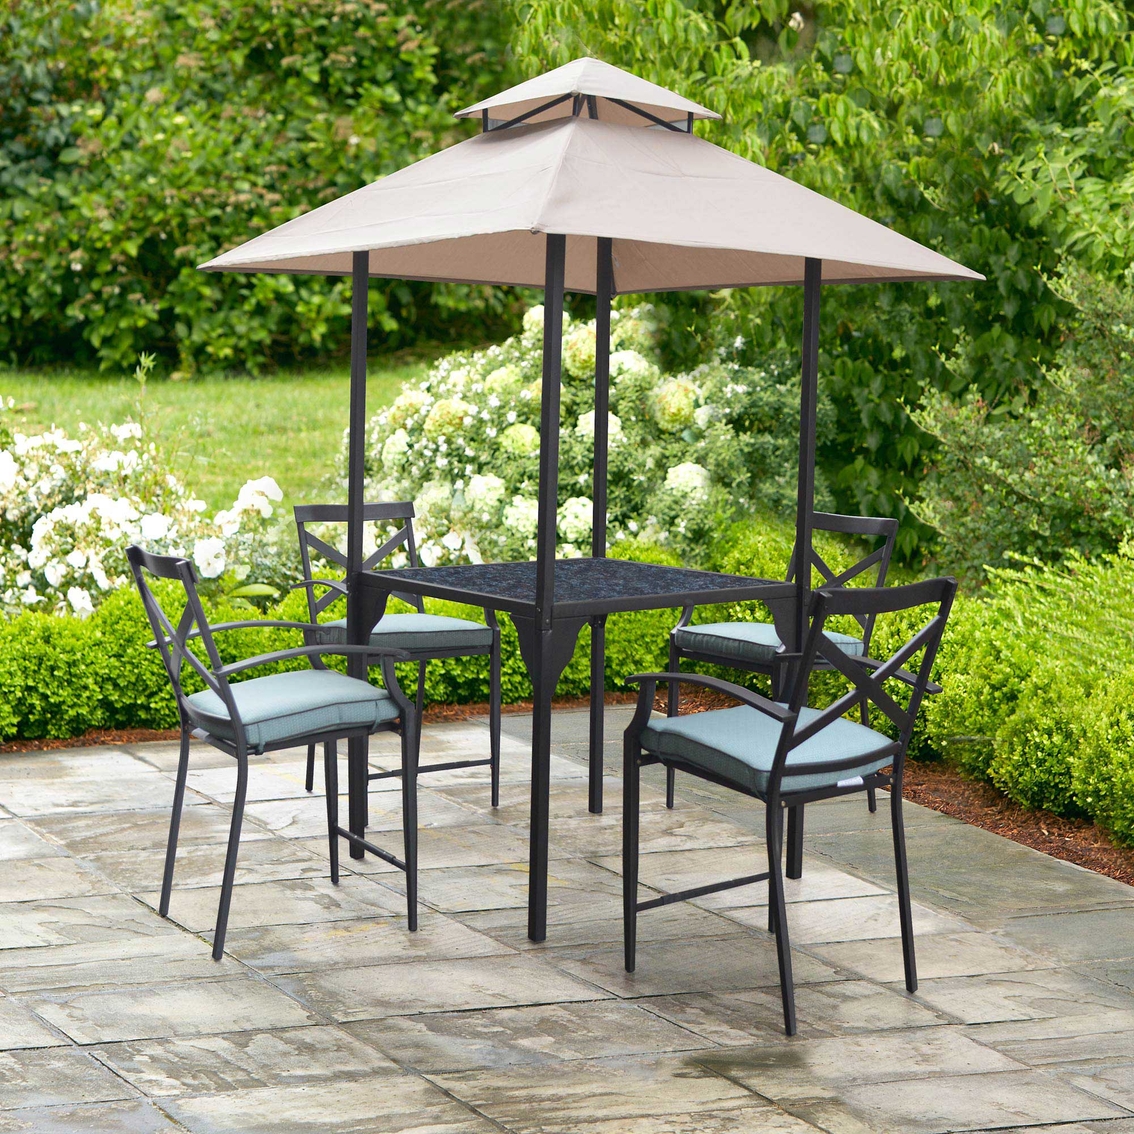 Courtyard Creations Blue River 5 Pc. Patio Set - Image 2 of 2